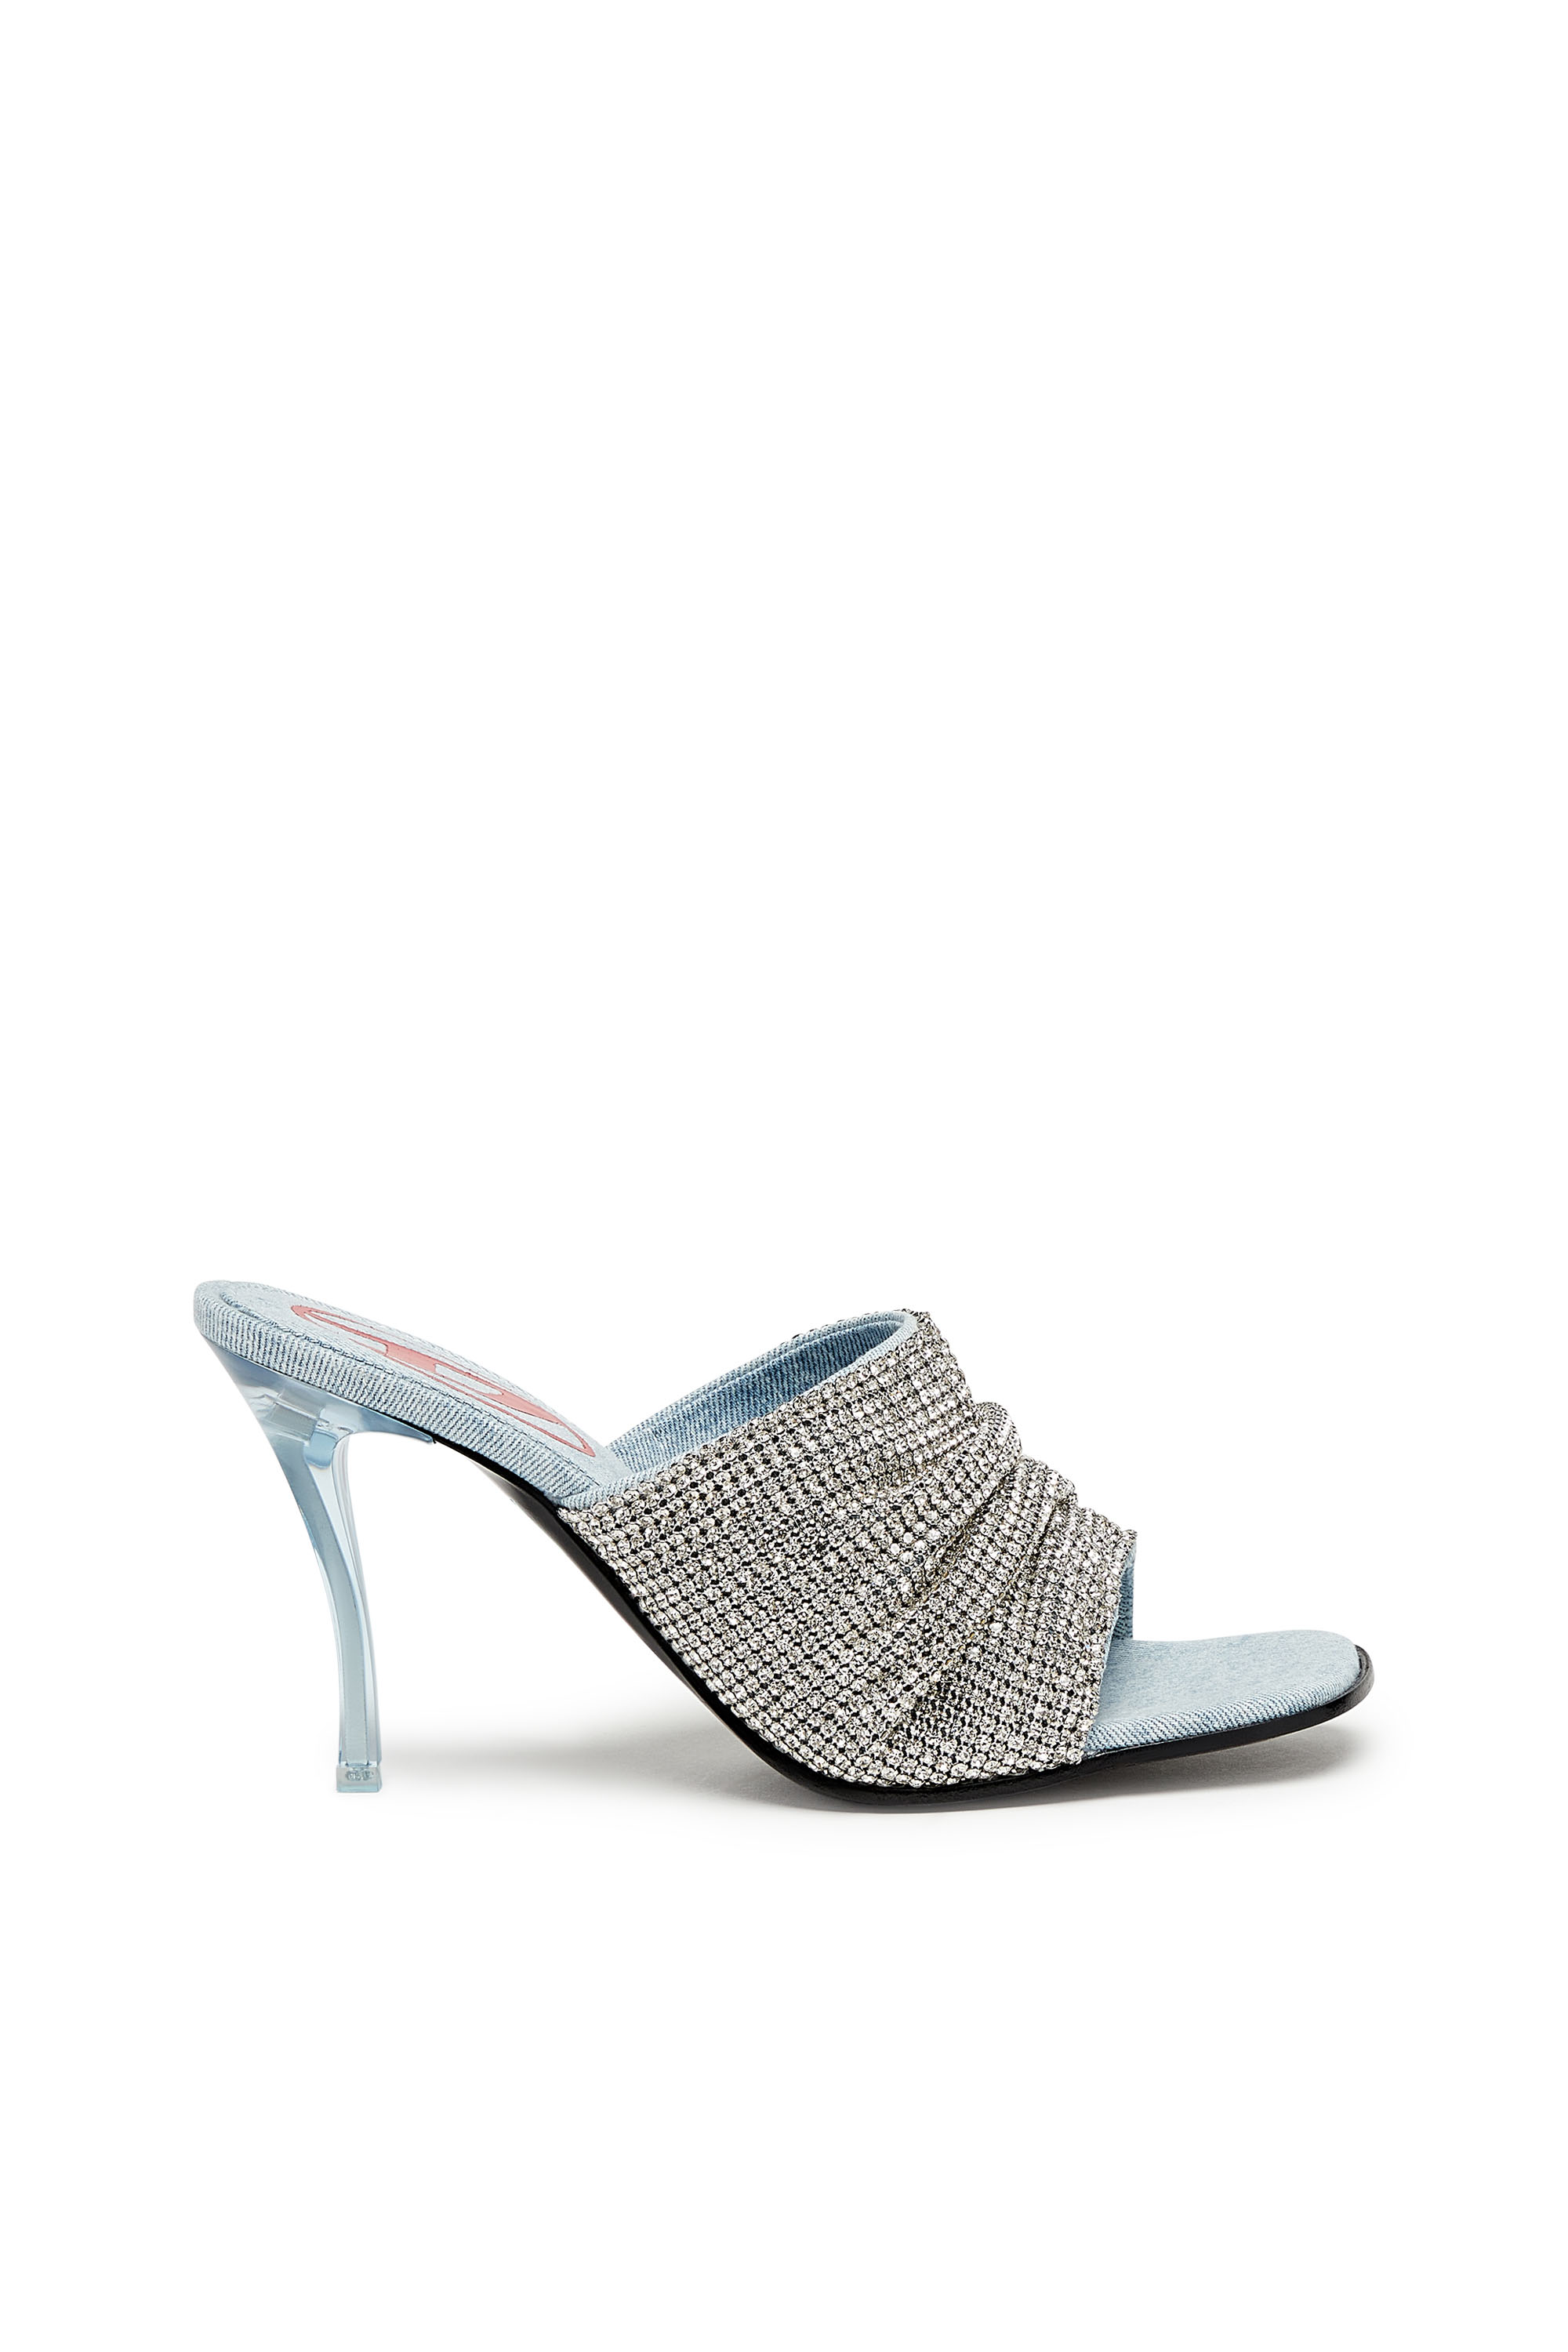 Diesel - D-SYDNEY SDL S, Female D-Sydney Sdl S Sandals - Mule sandals with rhinestone band in Silver - Image 1